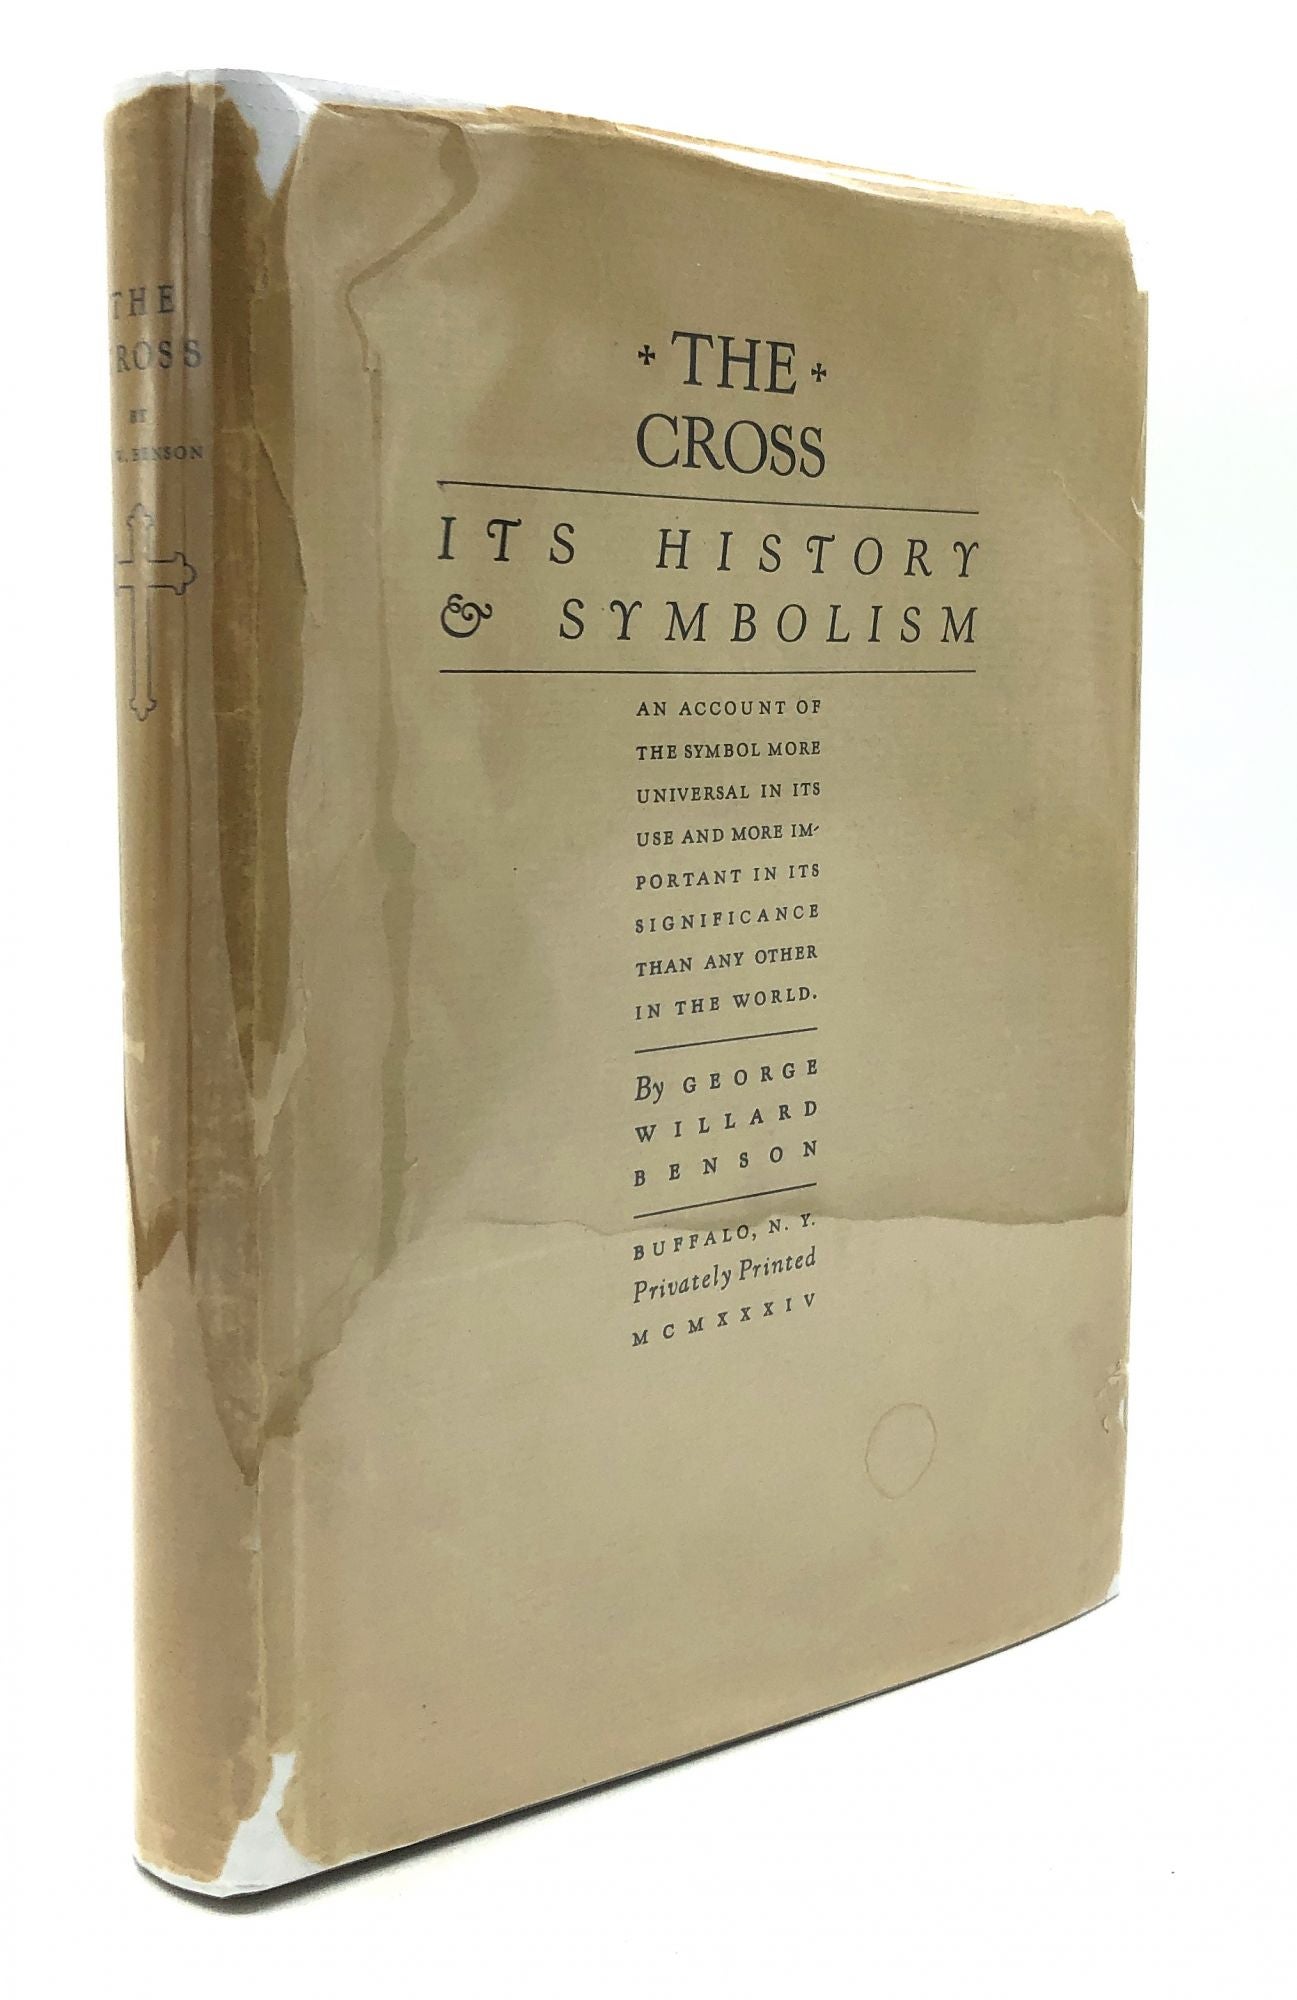 The Cross: Its History & Symbolism--An Account of the Symbol More